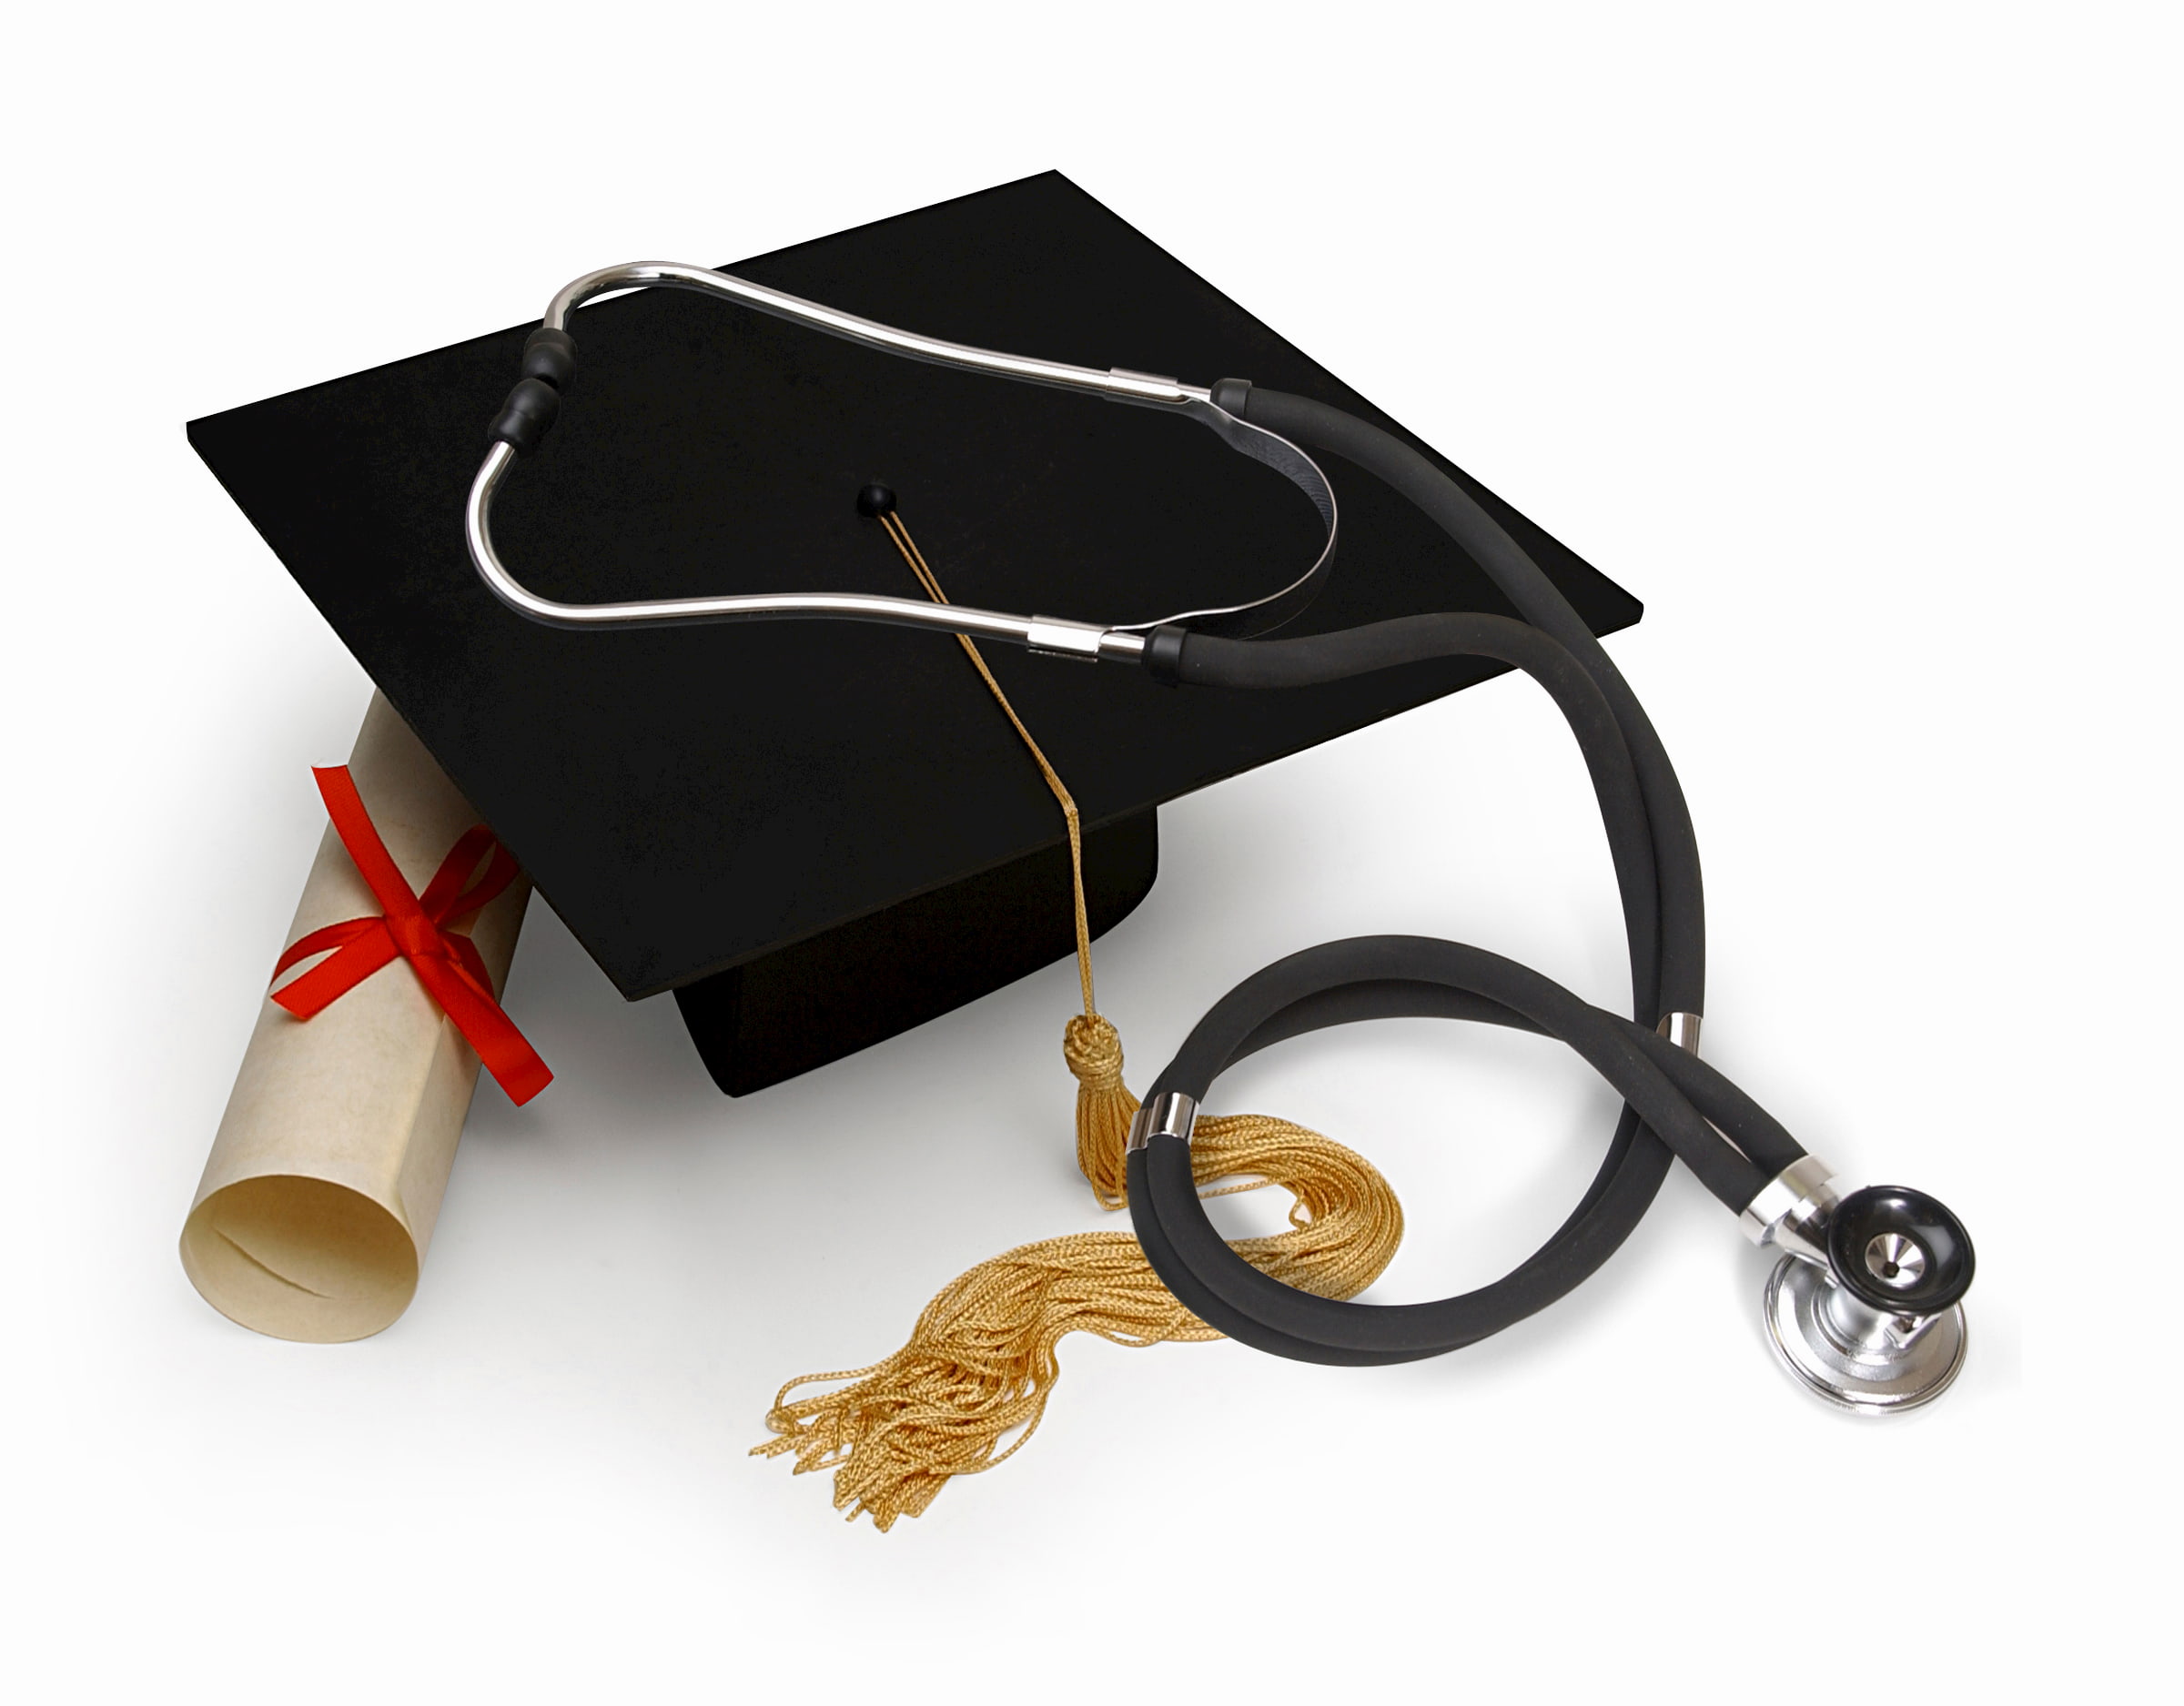 An image of a graduation cap, diploma, and stethoscope.